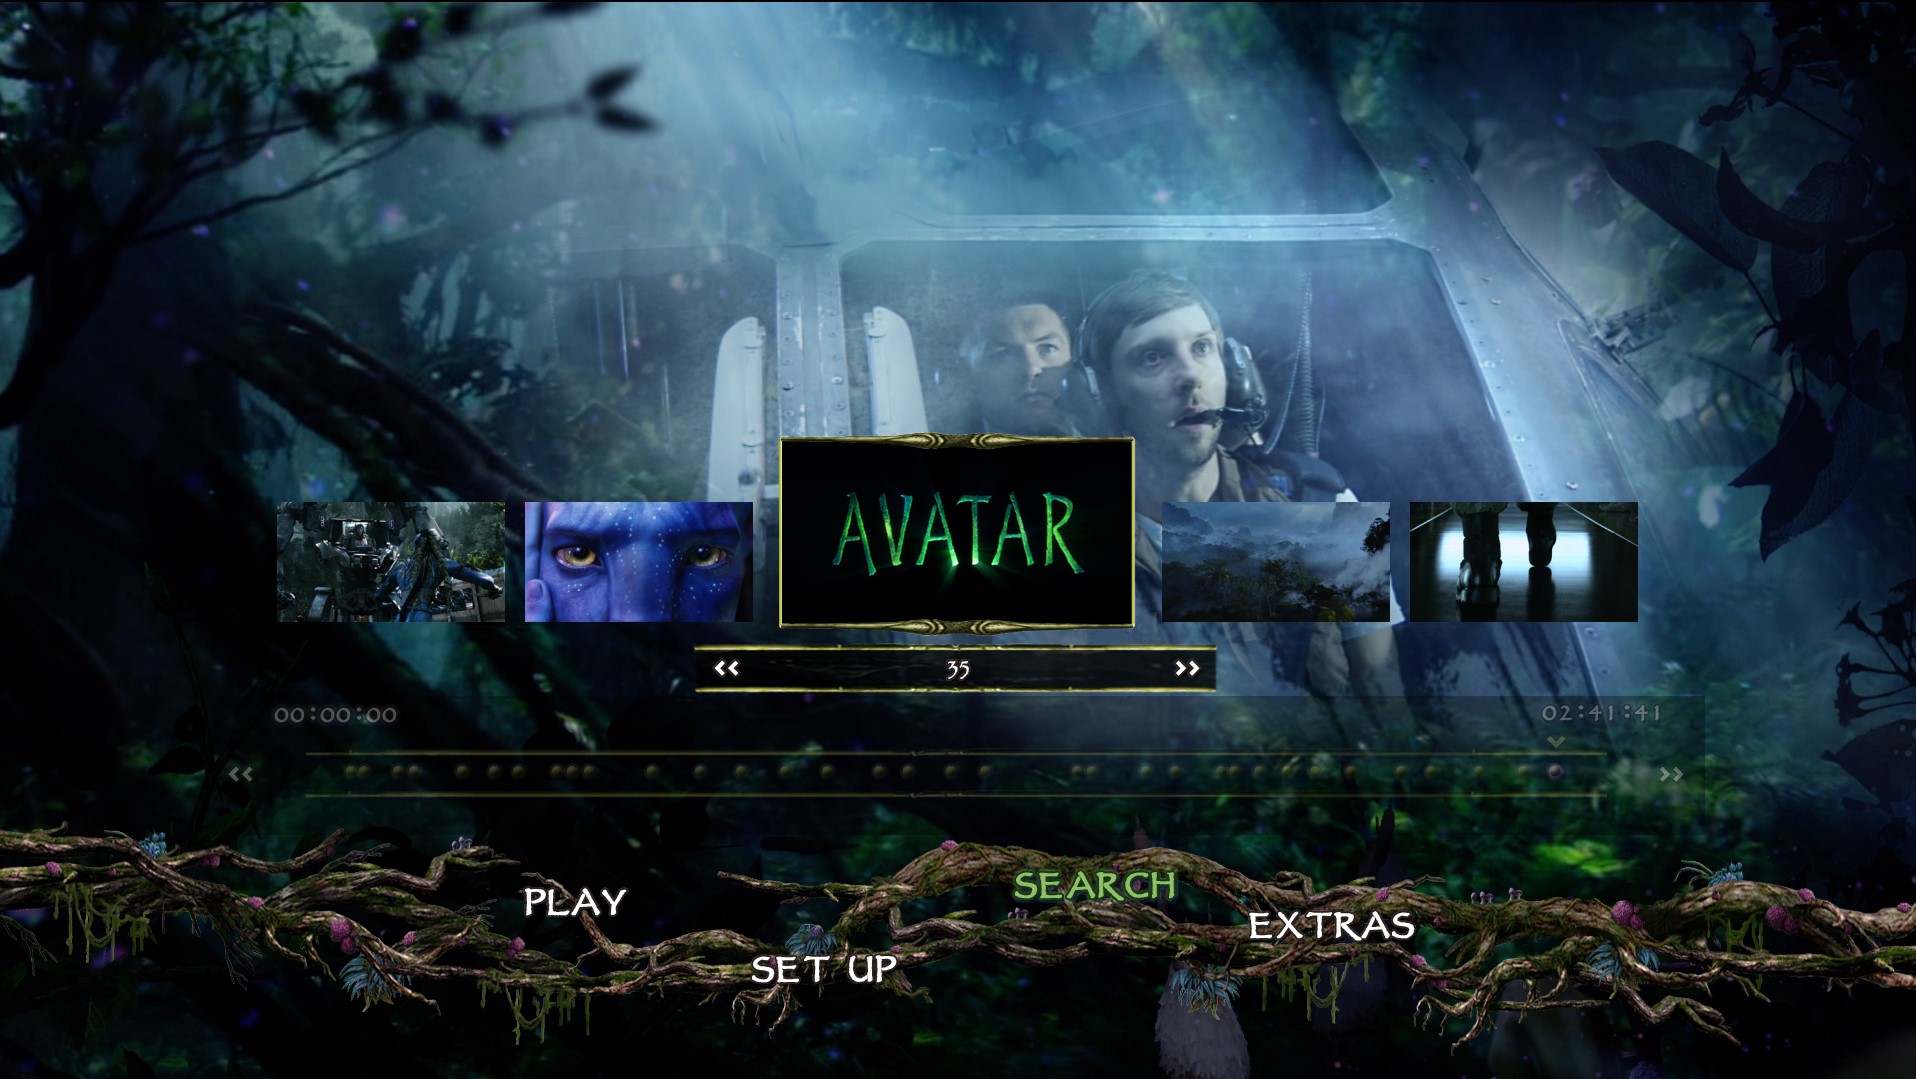 Avatar (2009) Extended Collectors Edition 1080p BD50 Latino - Ingles